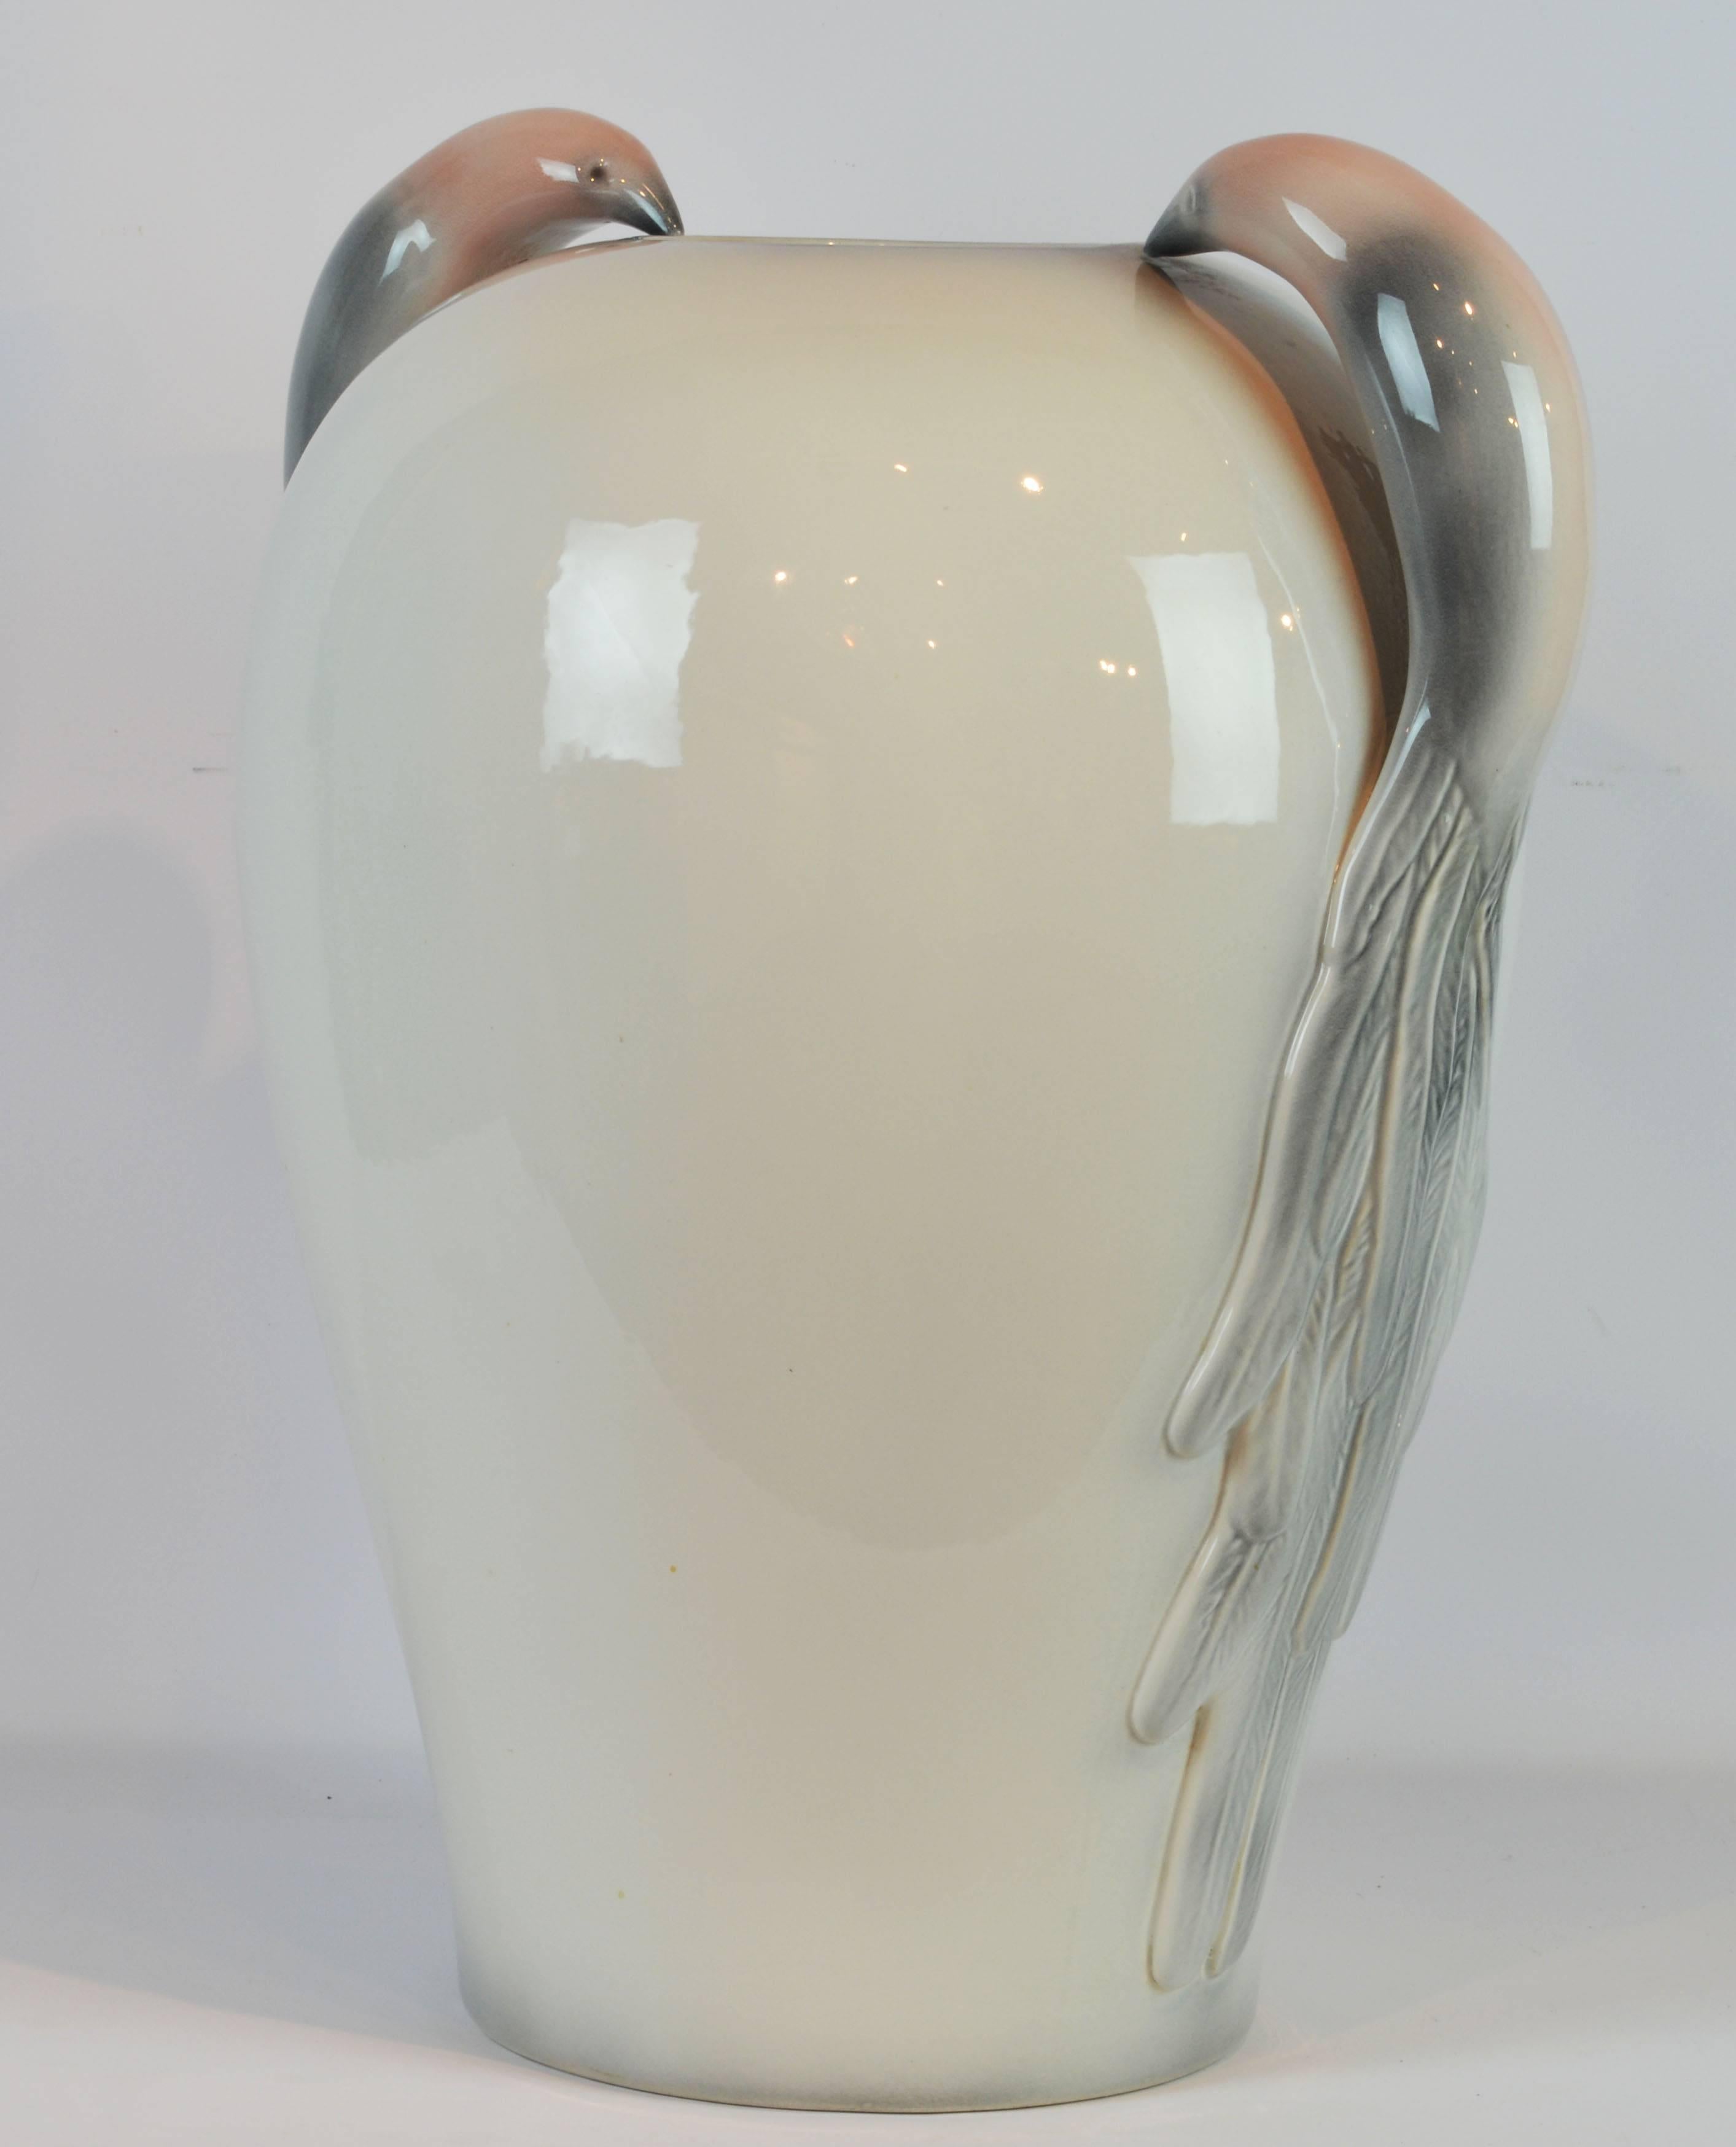 Standing 24 inches tall this elegant and unique vase of subtle color features a stunning pair of handles in the shape of birds of paradise stylized in the Art Deco manner.